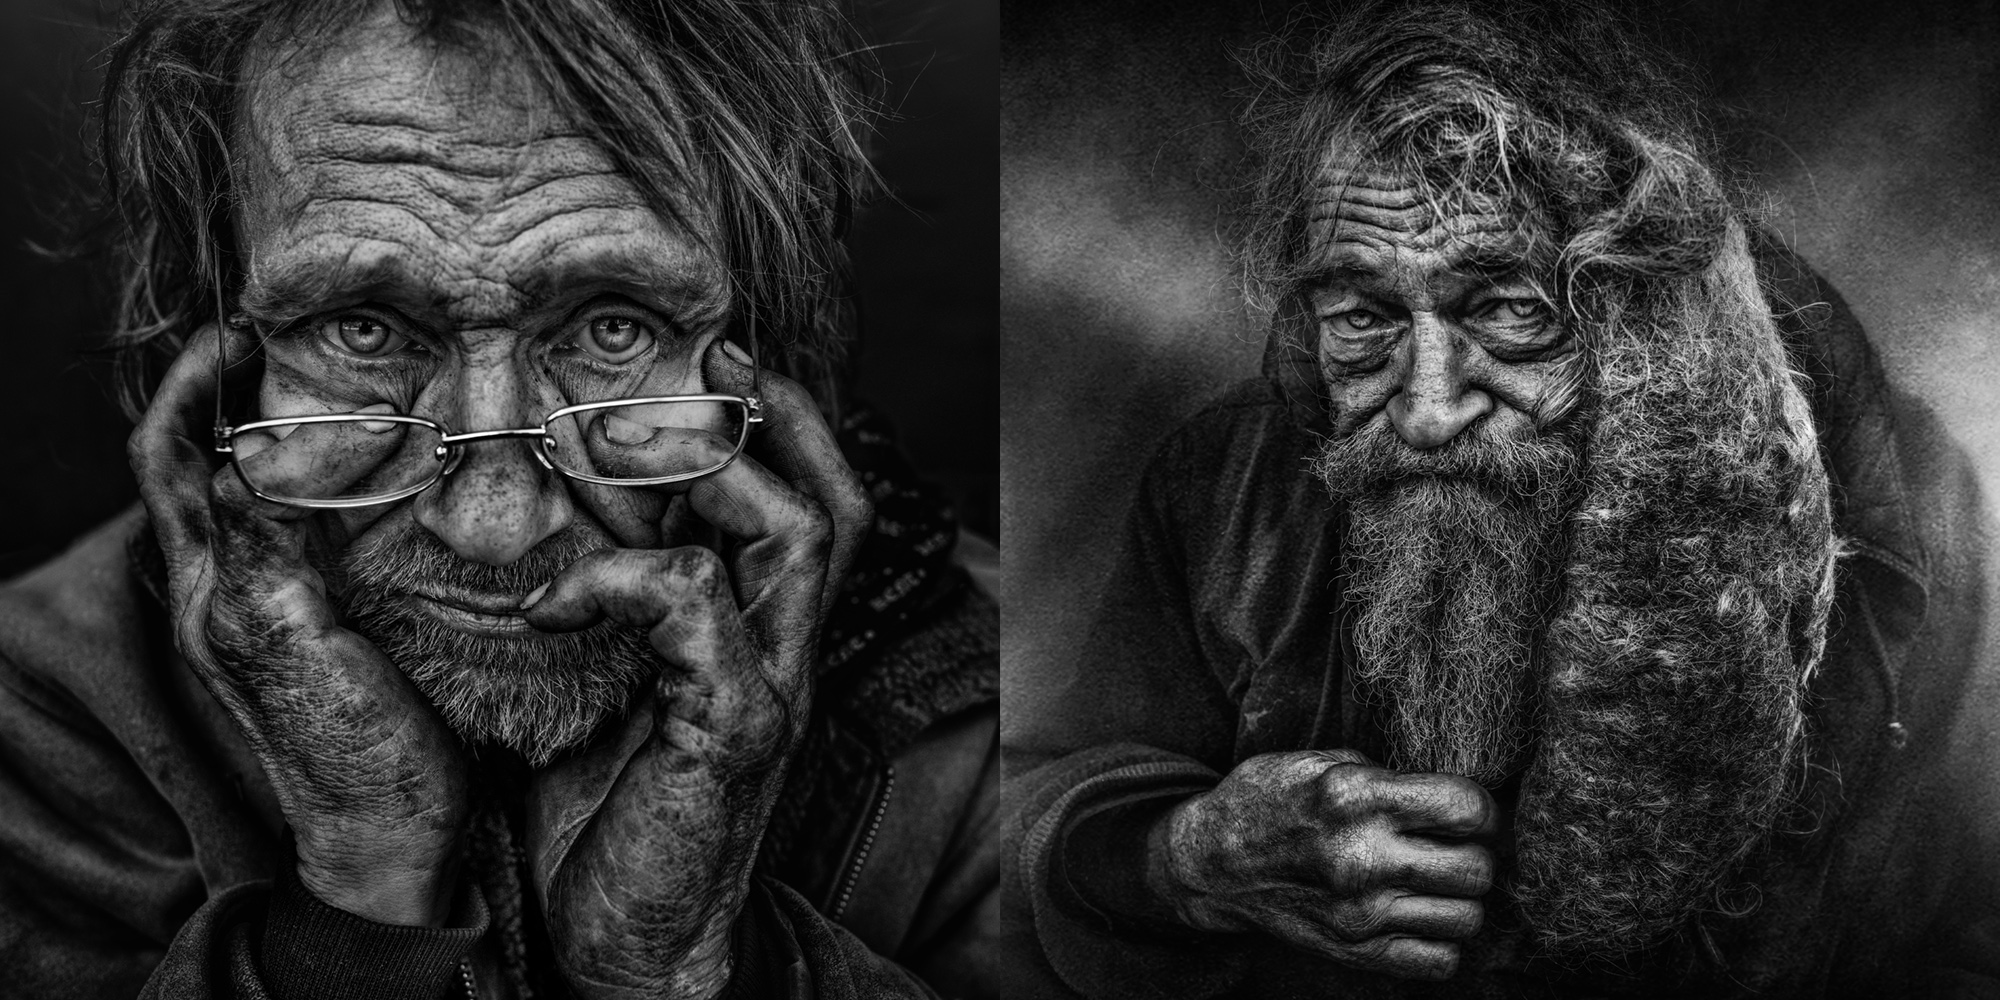 These Powerful Portraits are Raising Awareness and Aid for Sweden's Homeless